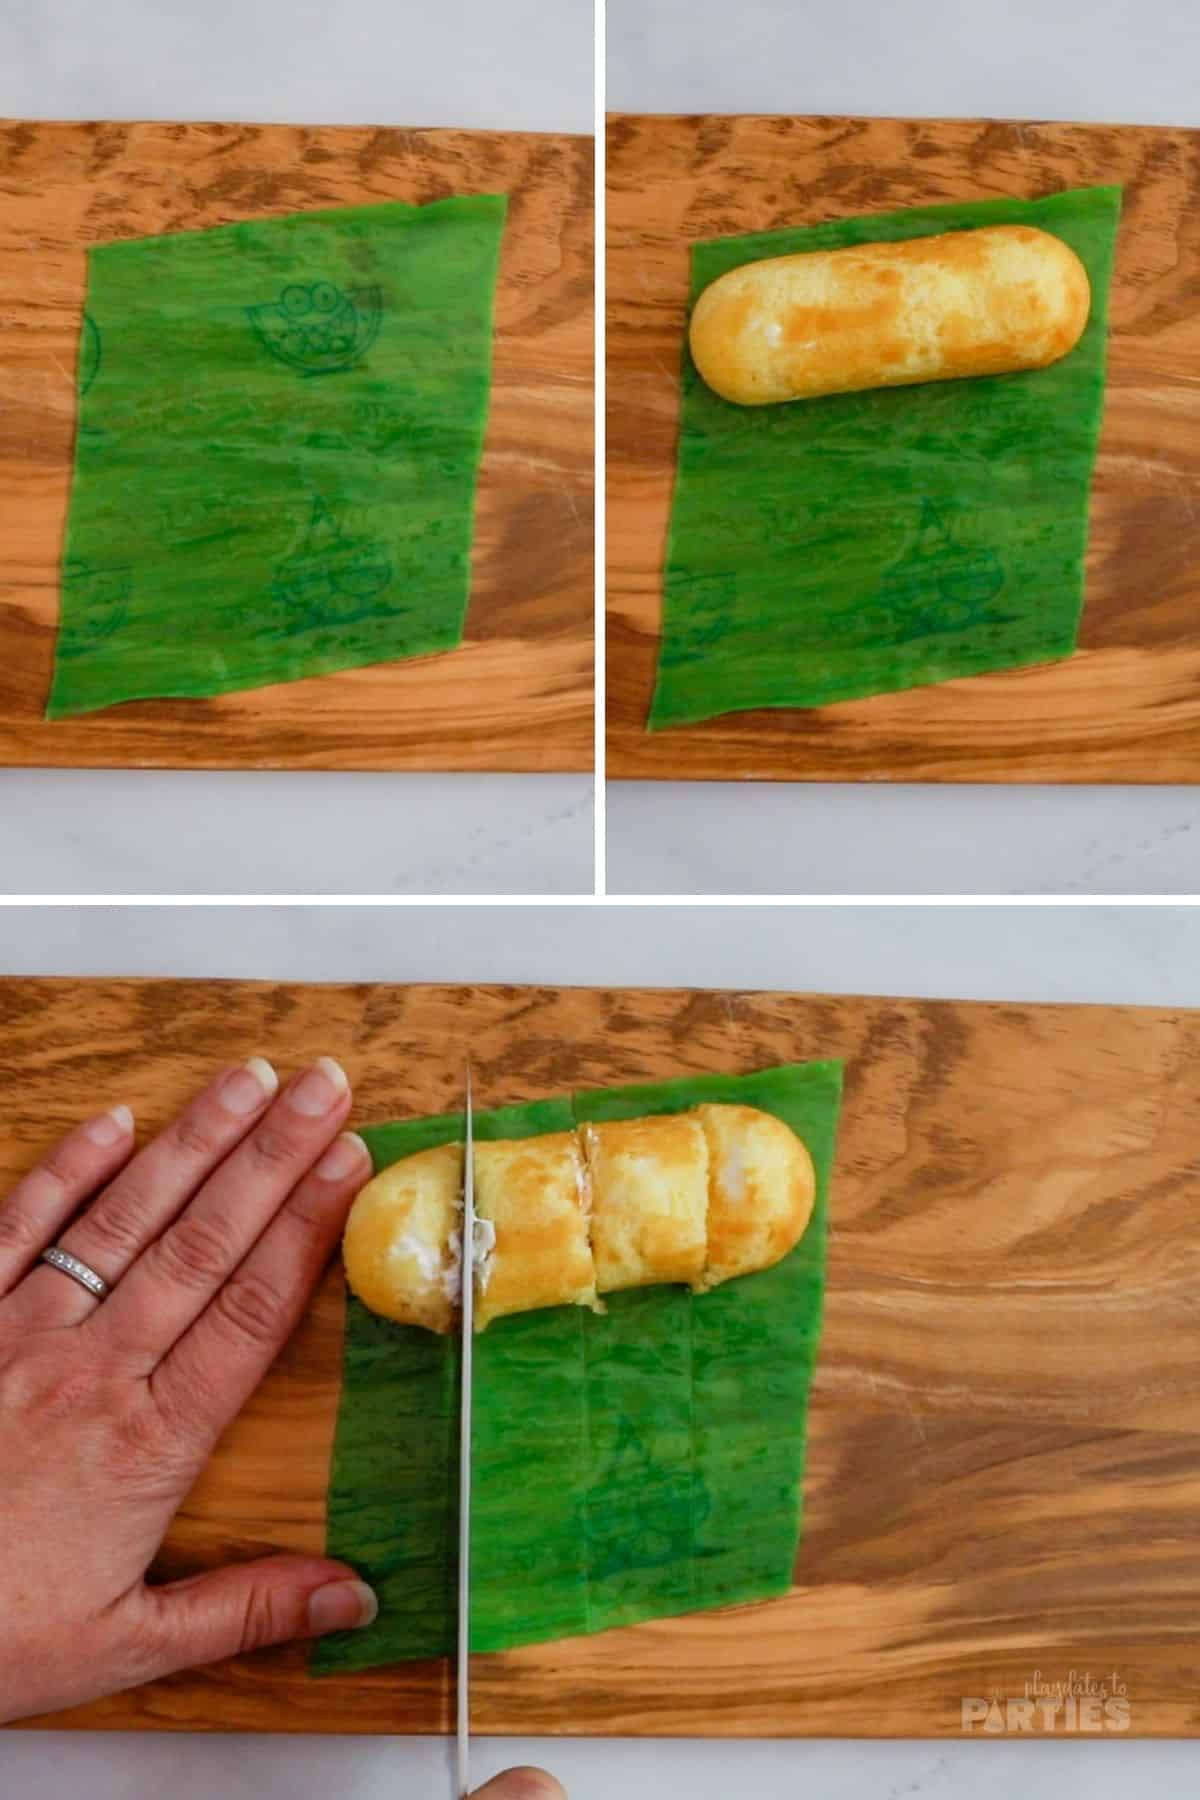 How to cut the fruit roll up and Twinkies evenly.